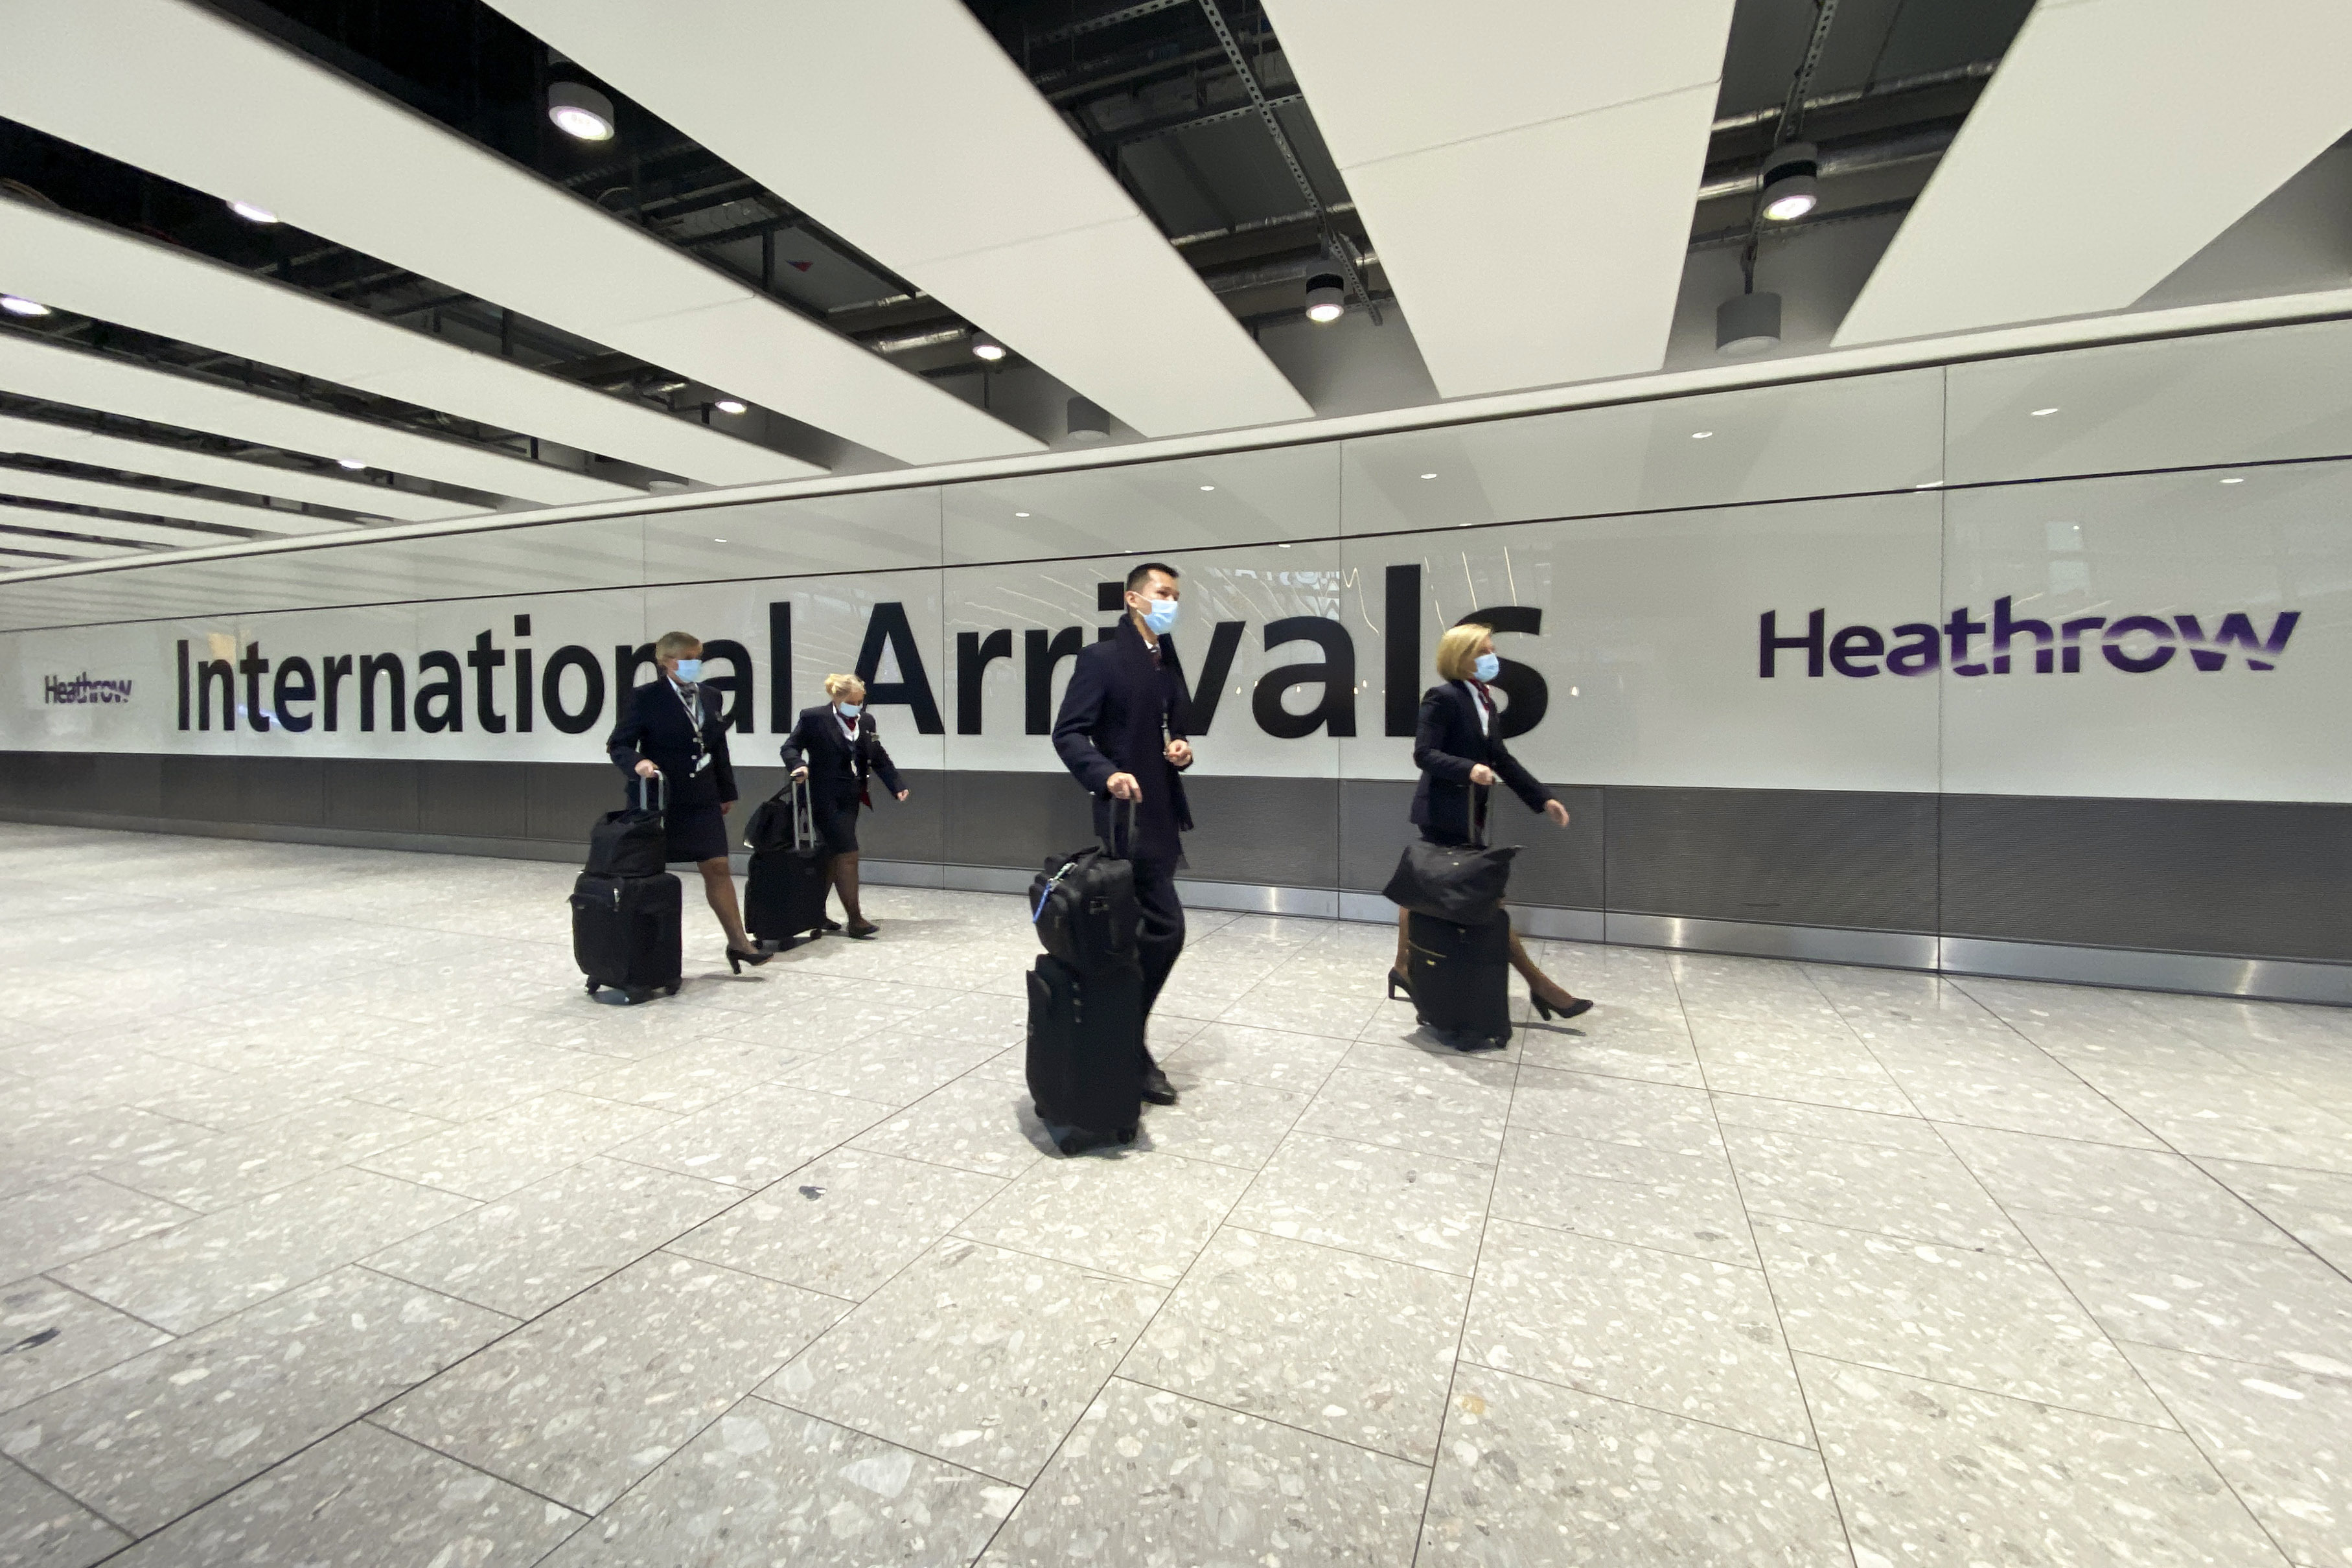 Members of a cabin crew walk through International Arrivals, at London's Heathrow Airport, Friday, Nov. 26, 2021. The U.K. announced that it was banning flights from South Africa and five other southern African countries effective at noon on Friday, and that anyone who had recently arrived from those countries would be asked to take a coronavirus test.